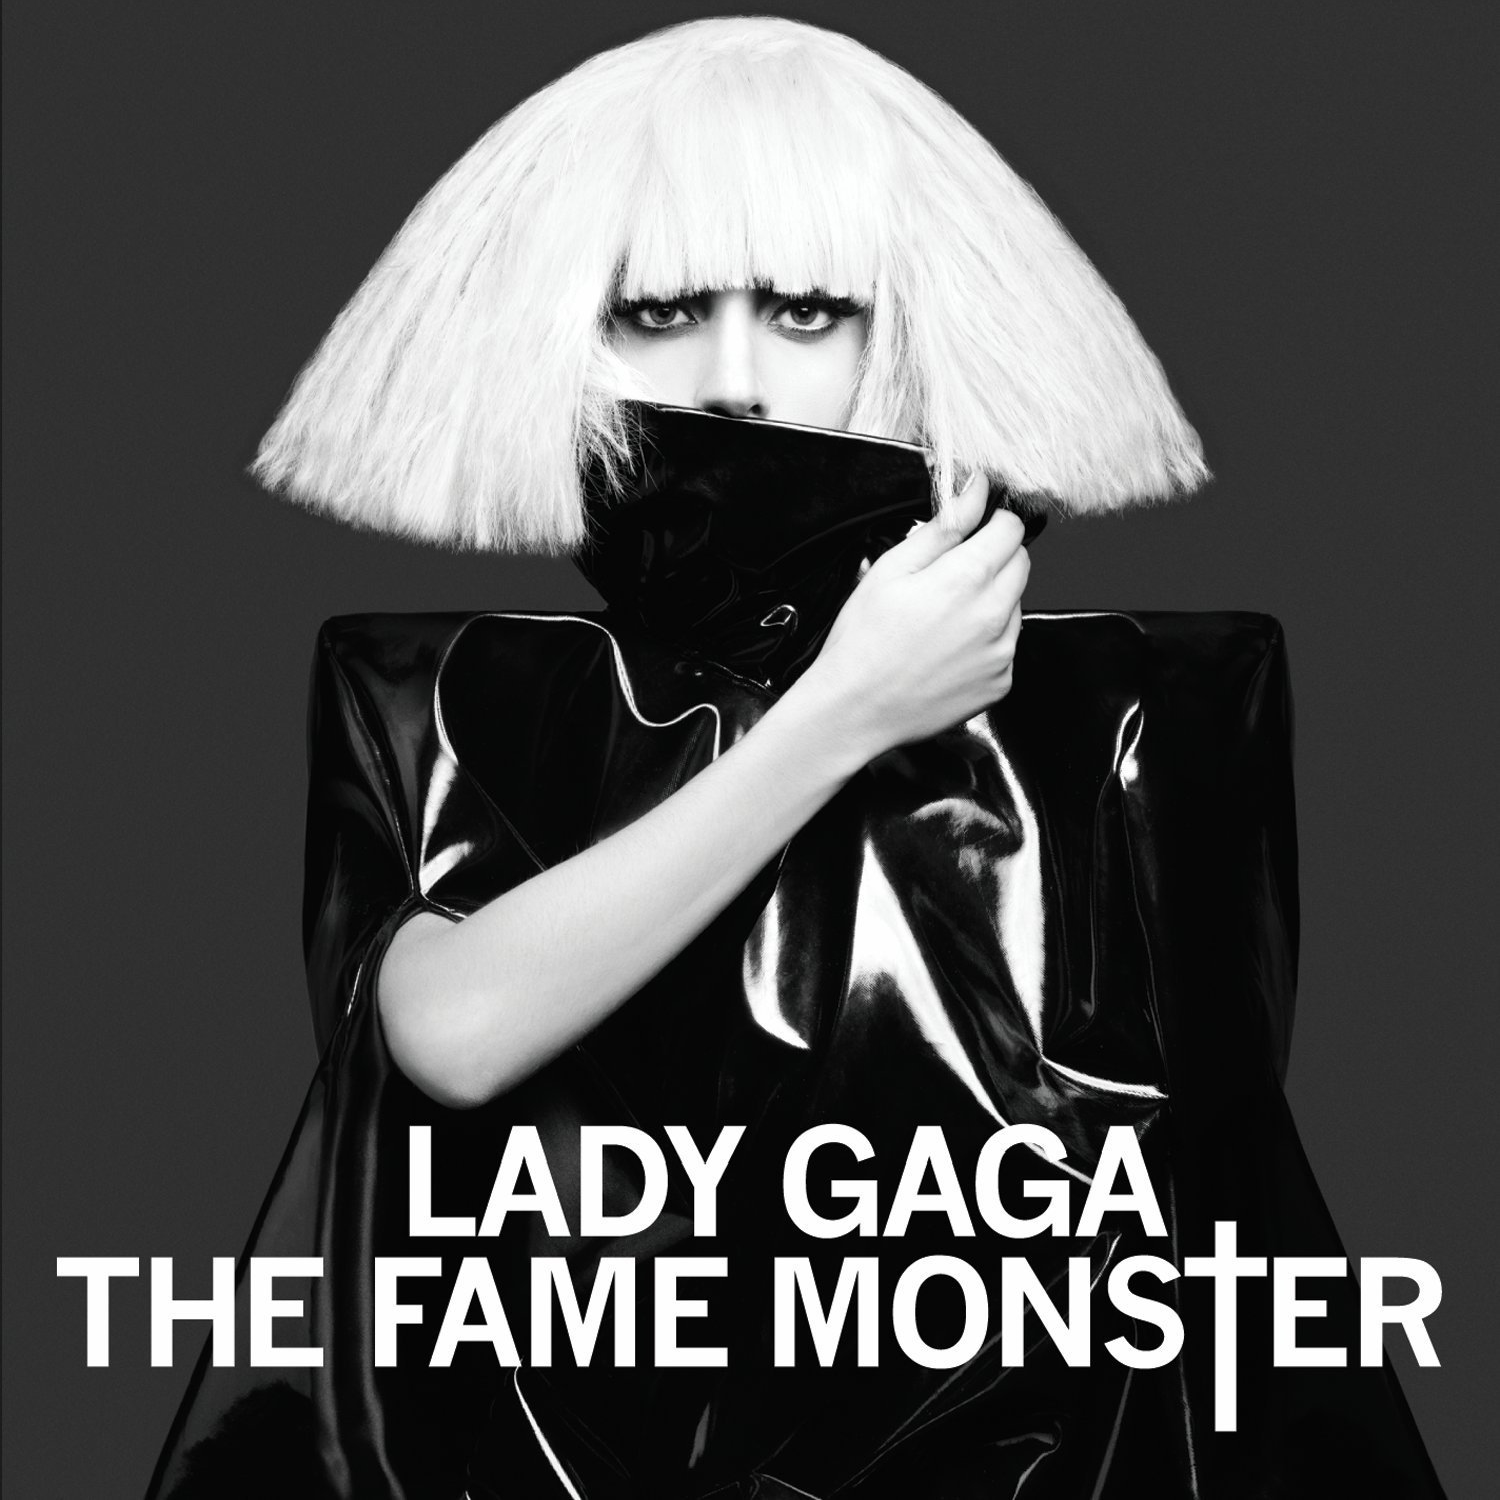 lady_gaga__the_fame_monster_by_boykatyca